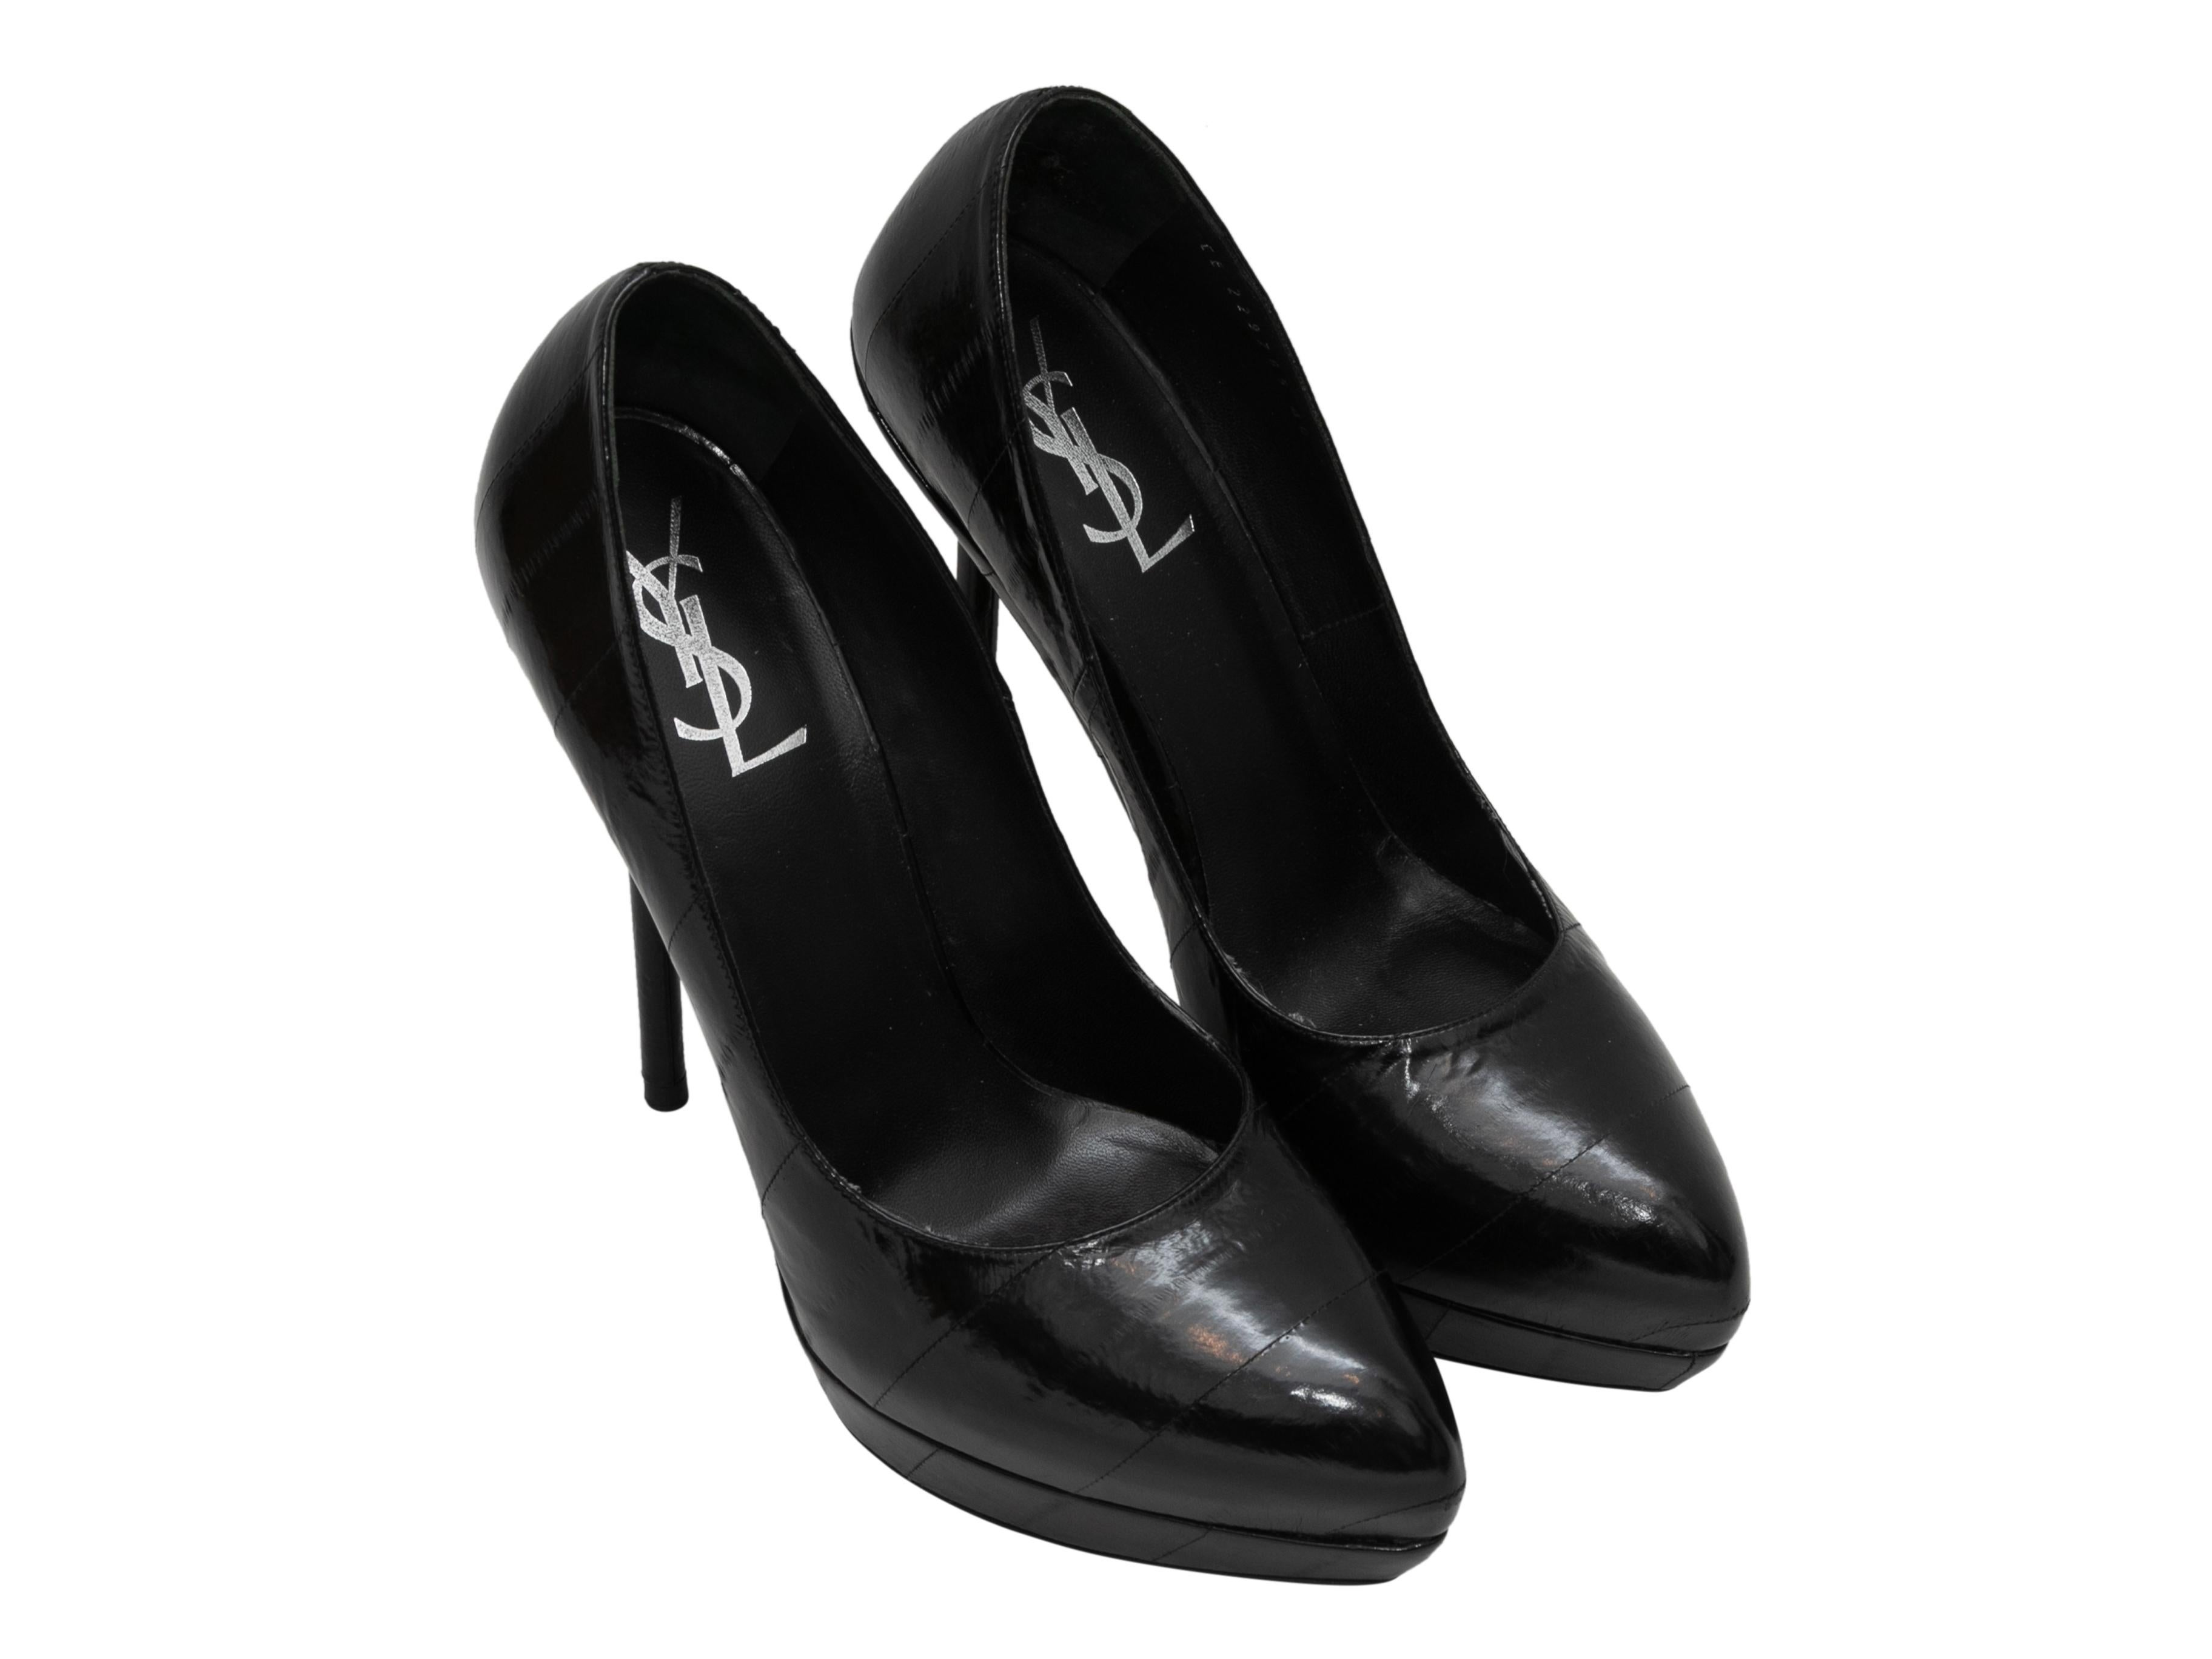 Black Yves Saint Laurent Embossed Platform Pumps Size 40 In Good Condition For Sale In New York, NY